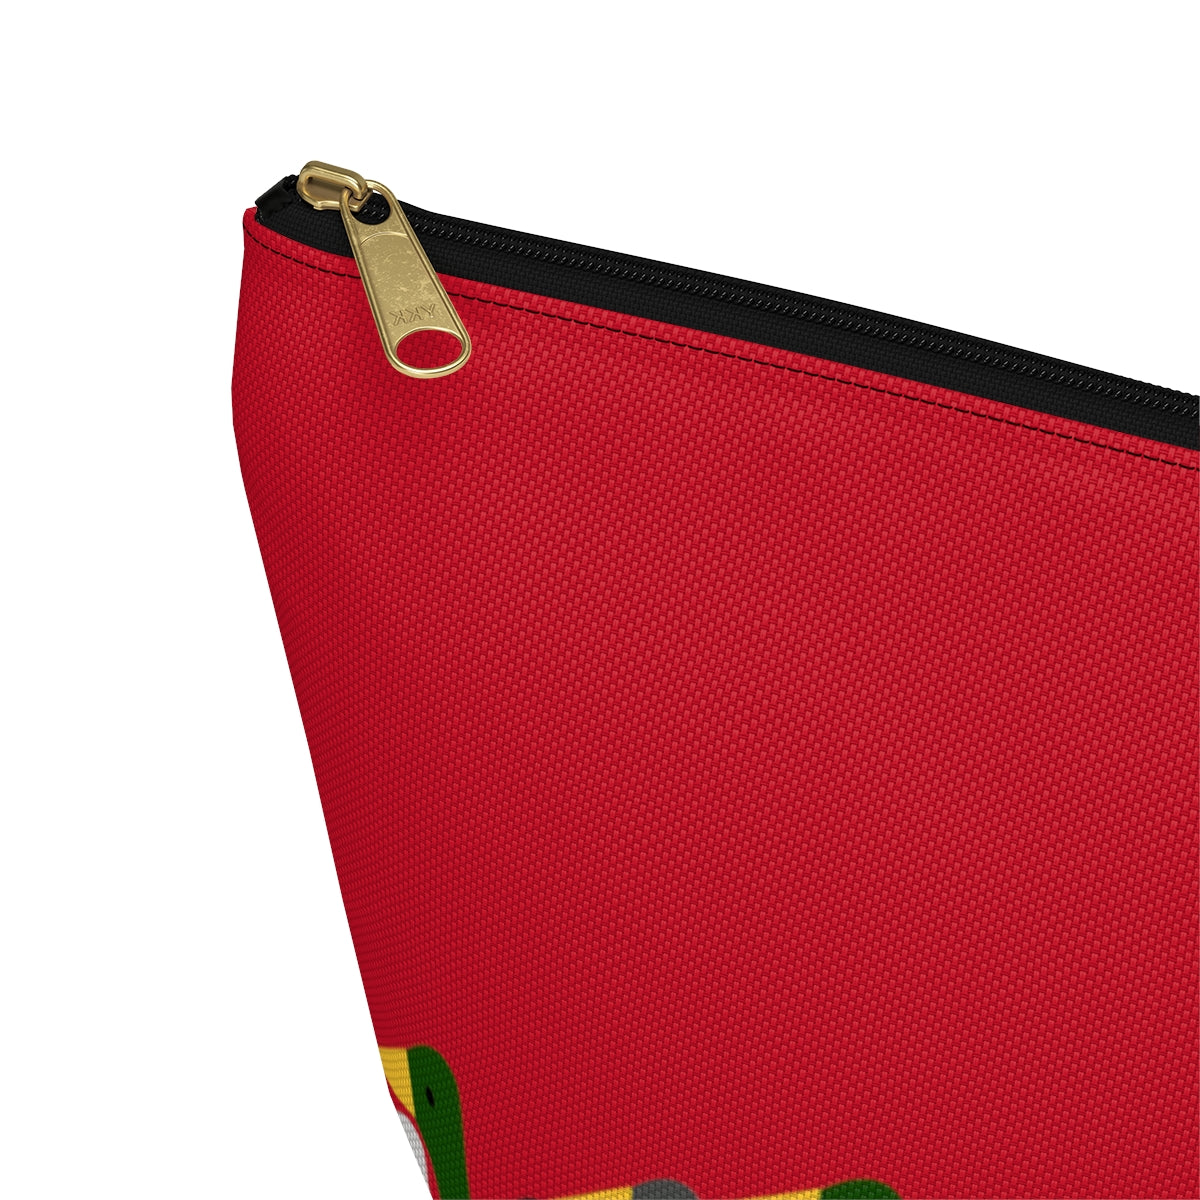 Marching ducks - red - Accessory Pouch w T-bottom